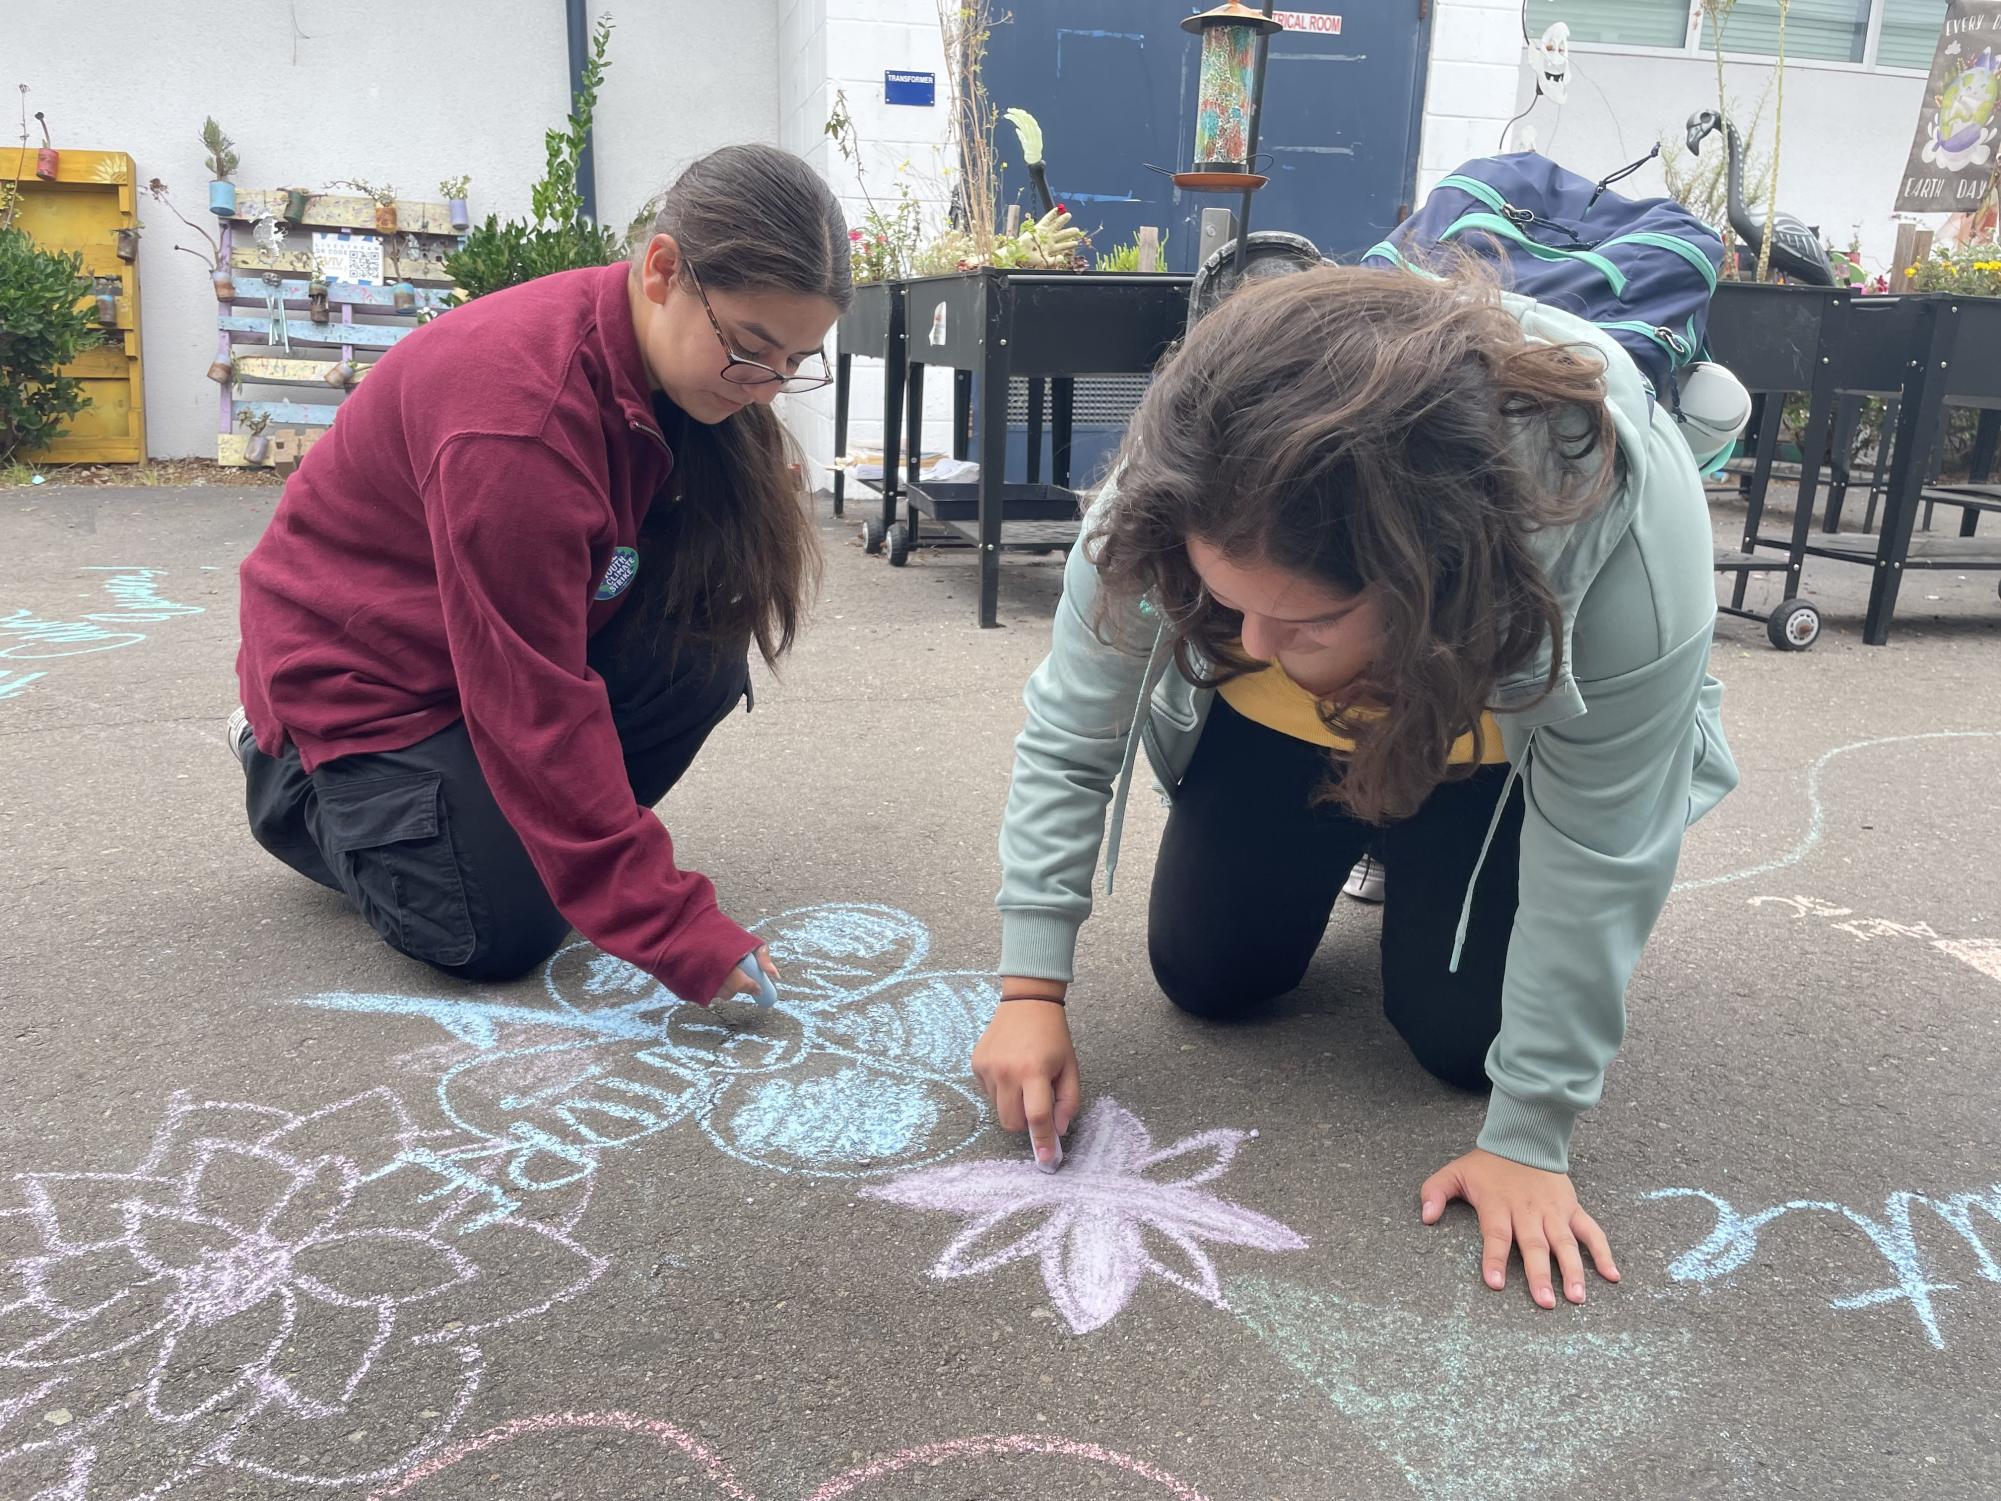 Green Team and Y4SF president Aaliyah Victoria (left) demonstrates Climate Change week activity during lunch, sketching colorful art on the blacktop. Erica Palacios (right) joins Victoria in the activity.